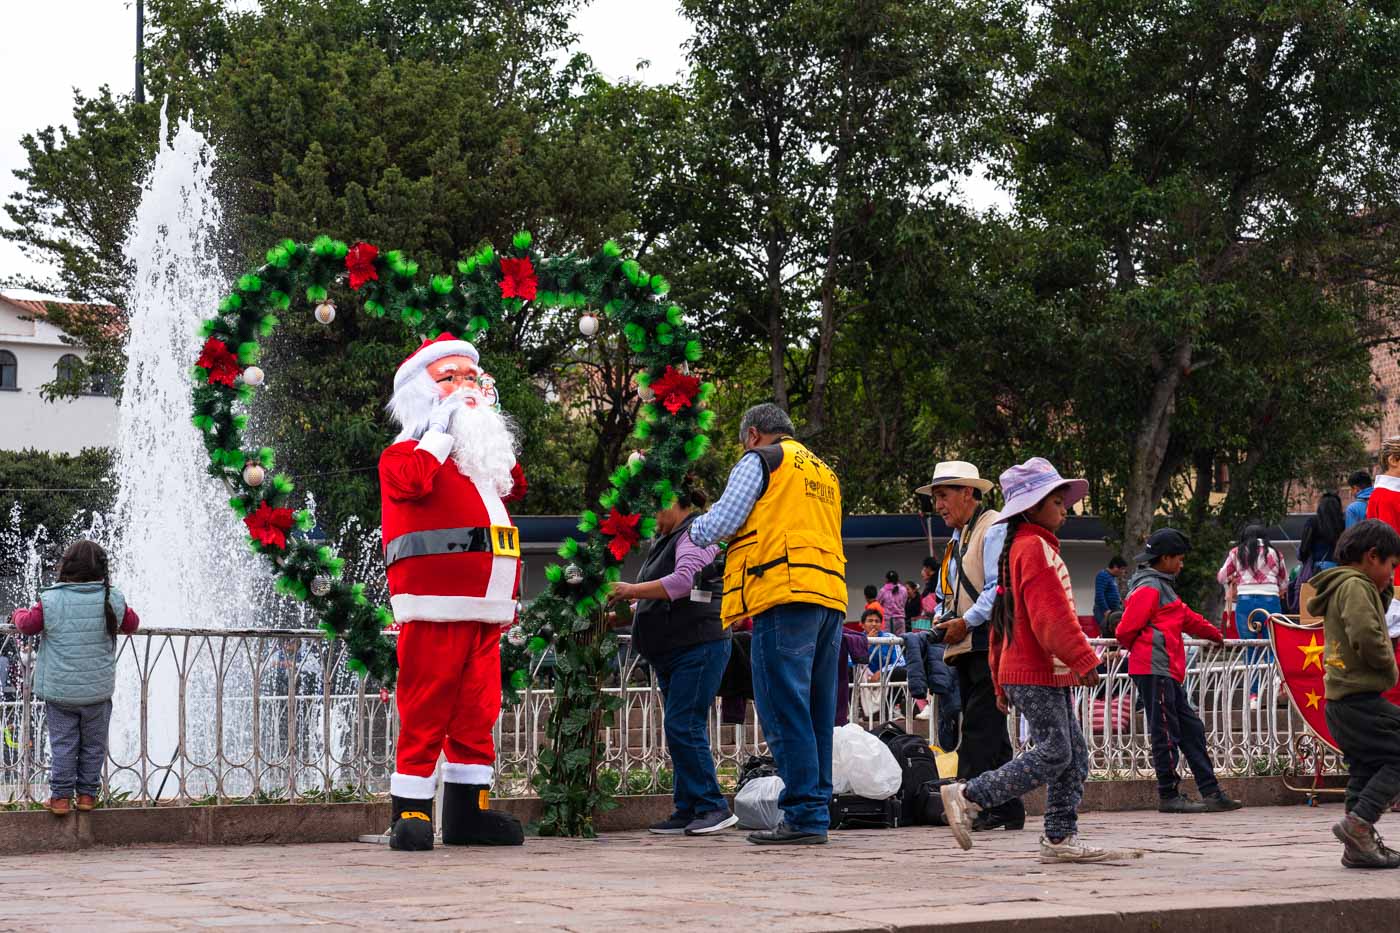 A man dressed as Santa in Plaza San Francisco along with his photographers setting up a display.